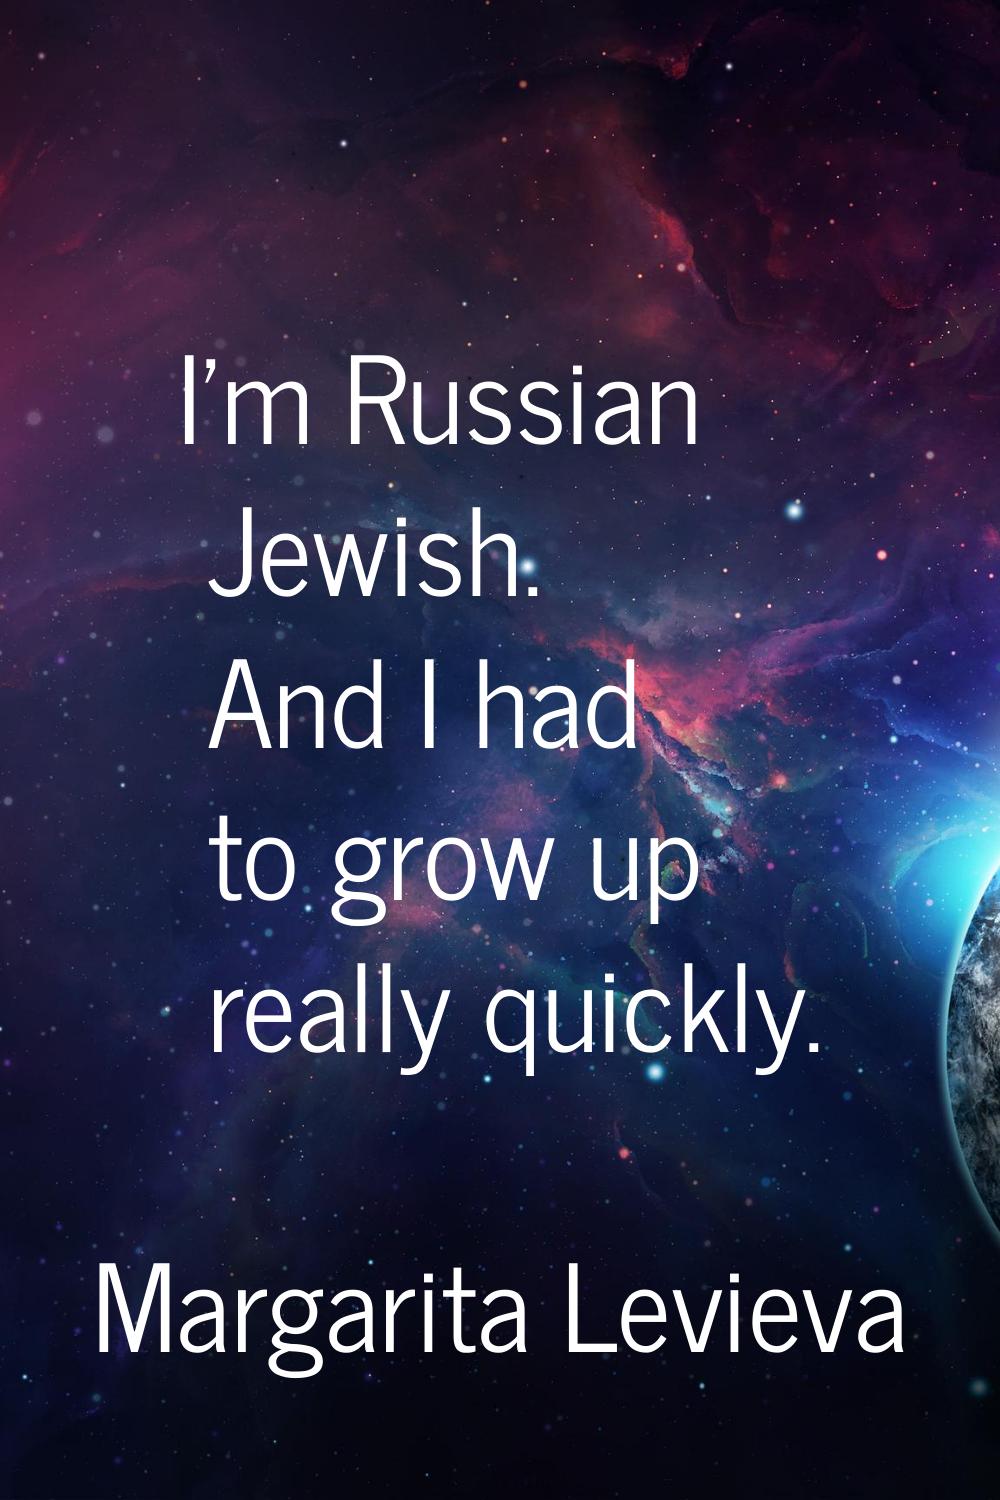 I'm Russian Jewish. And I had to grow up really quickly.